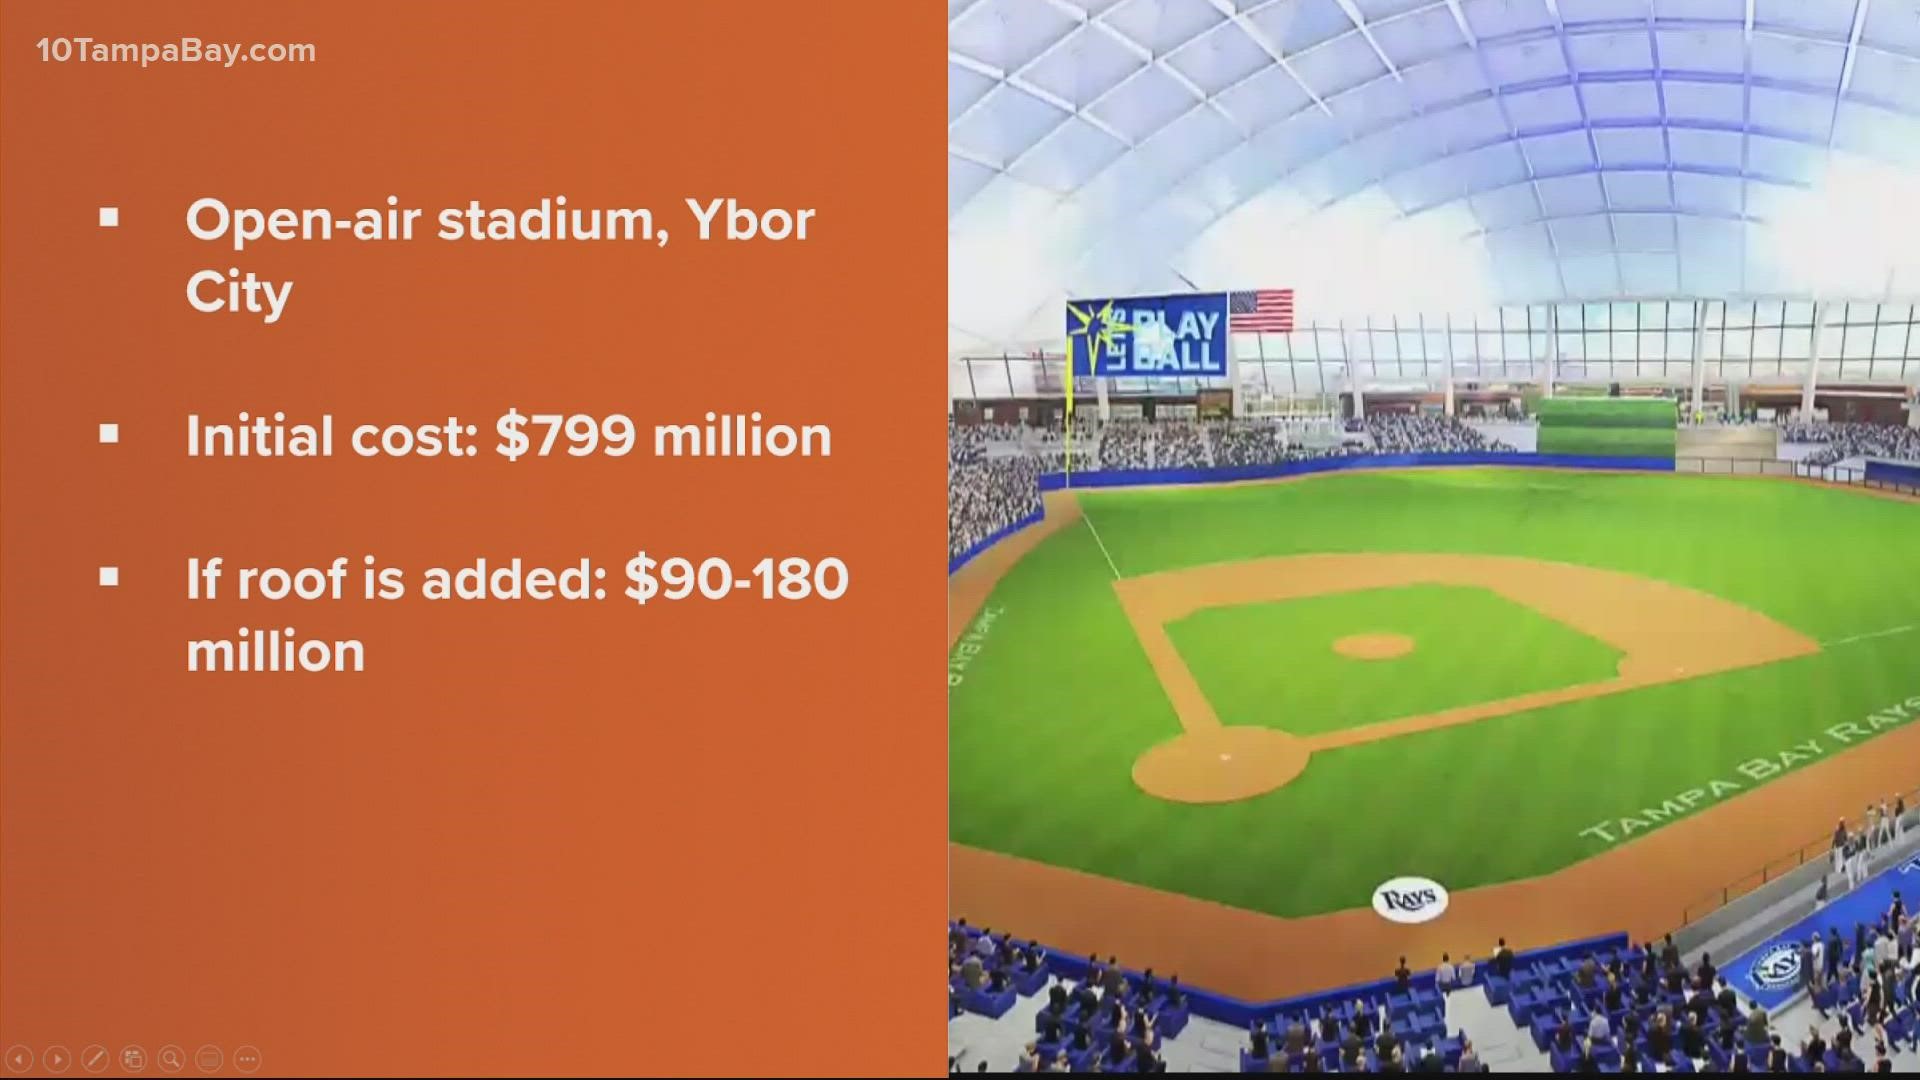 The Rays are in a race against time to nail down a new home before their lease at Tropicana Field ends in 2027.